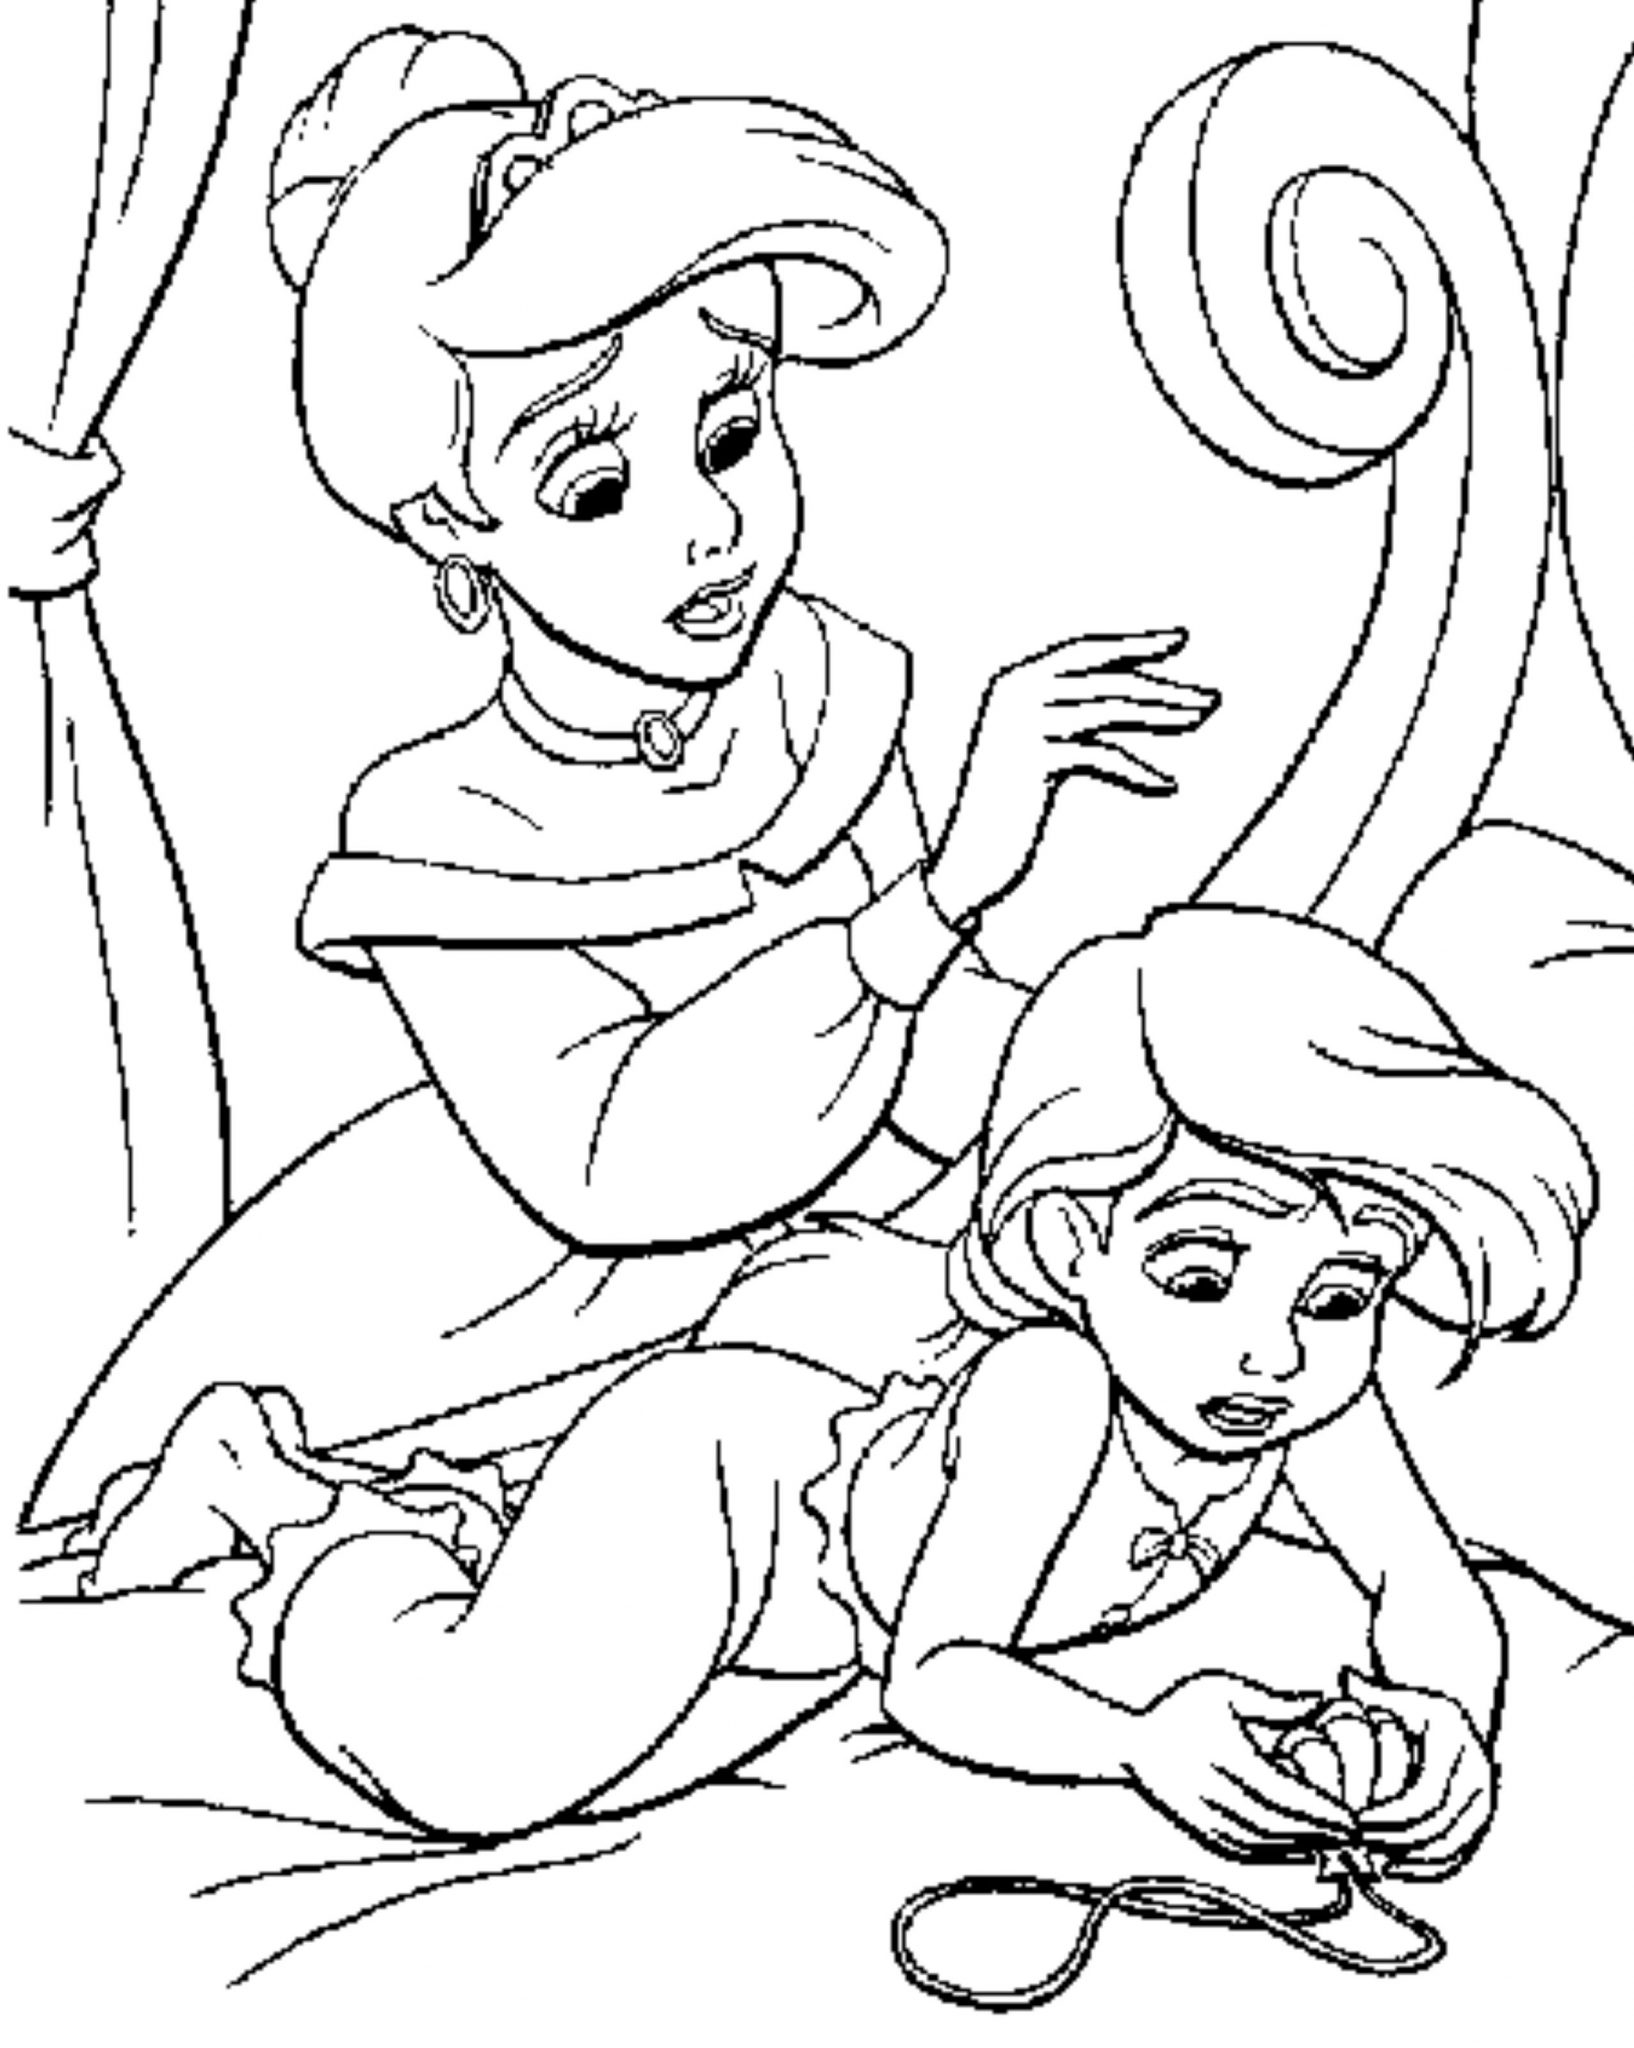 Little Mermaid Coloring Coloring Pages - Kidsuki